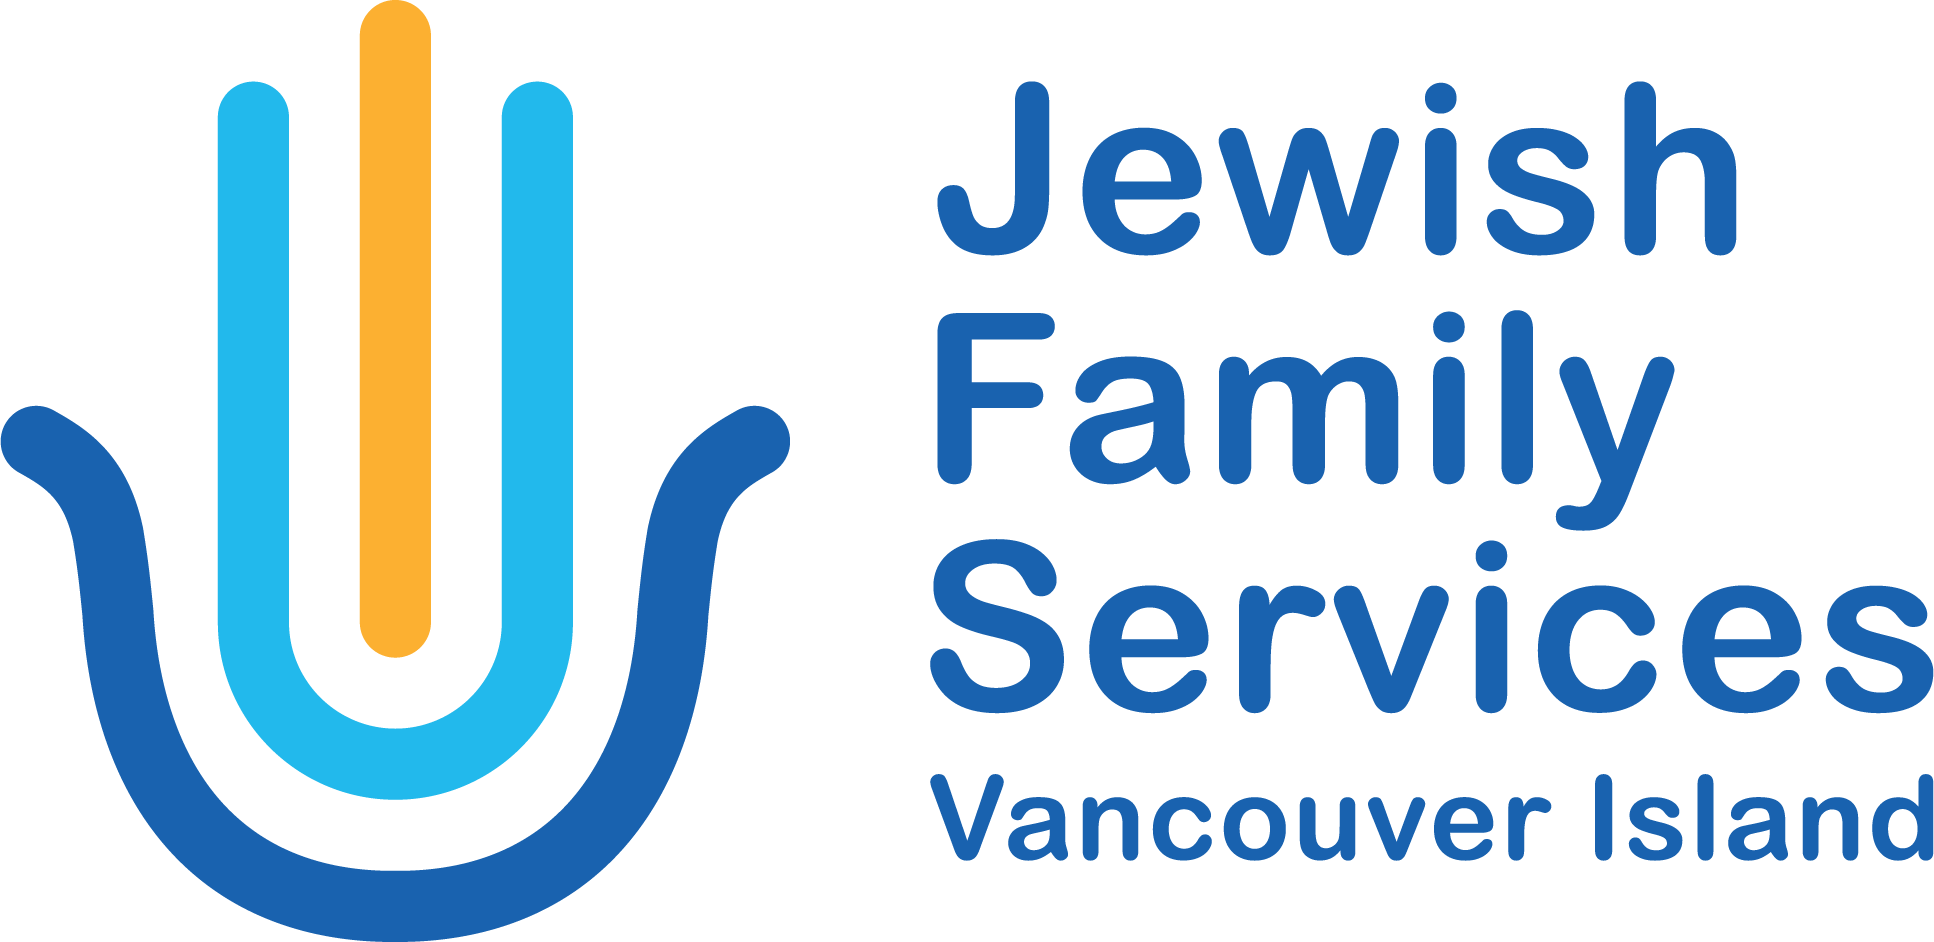 Jewish Family Services Vancouver Island